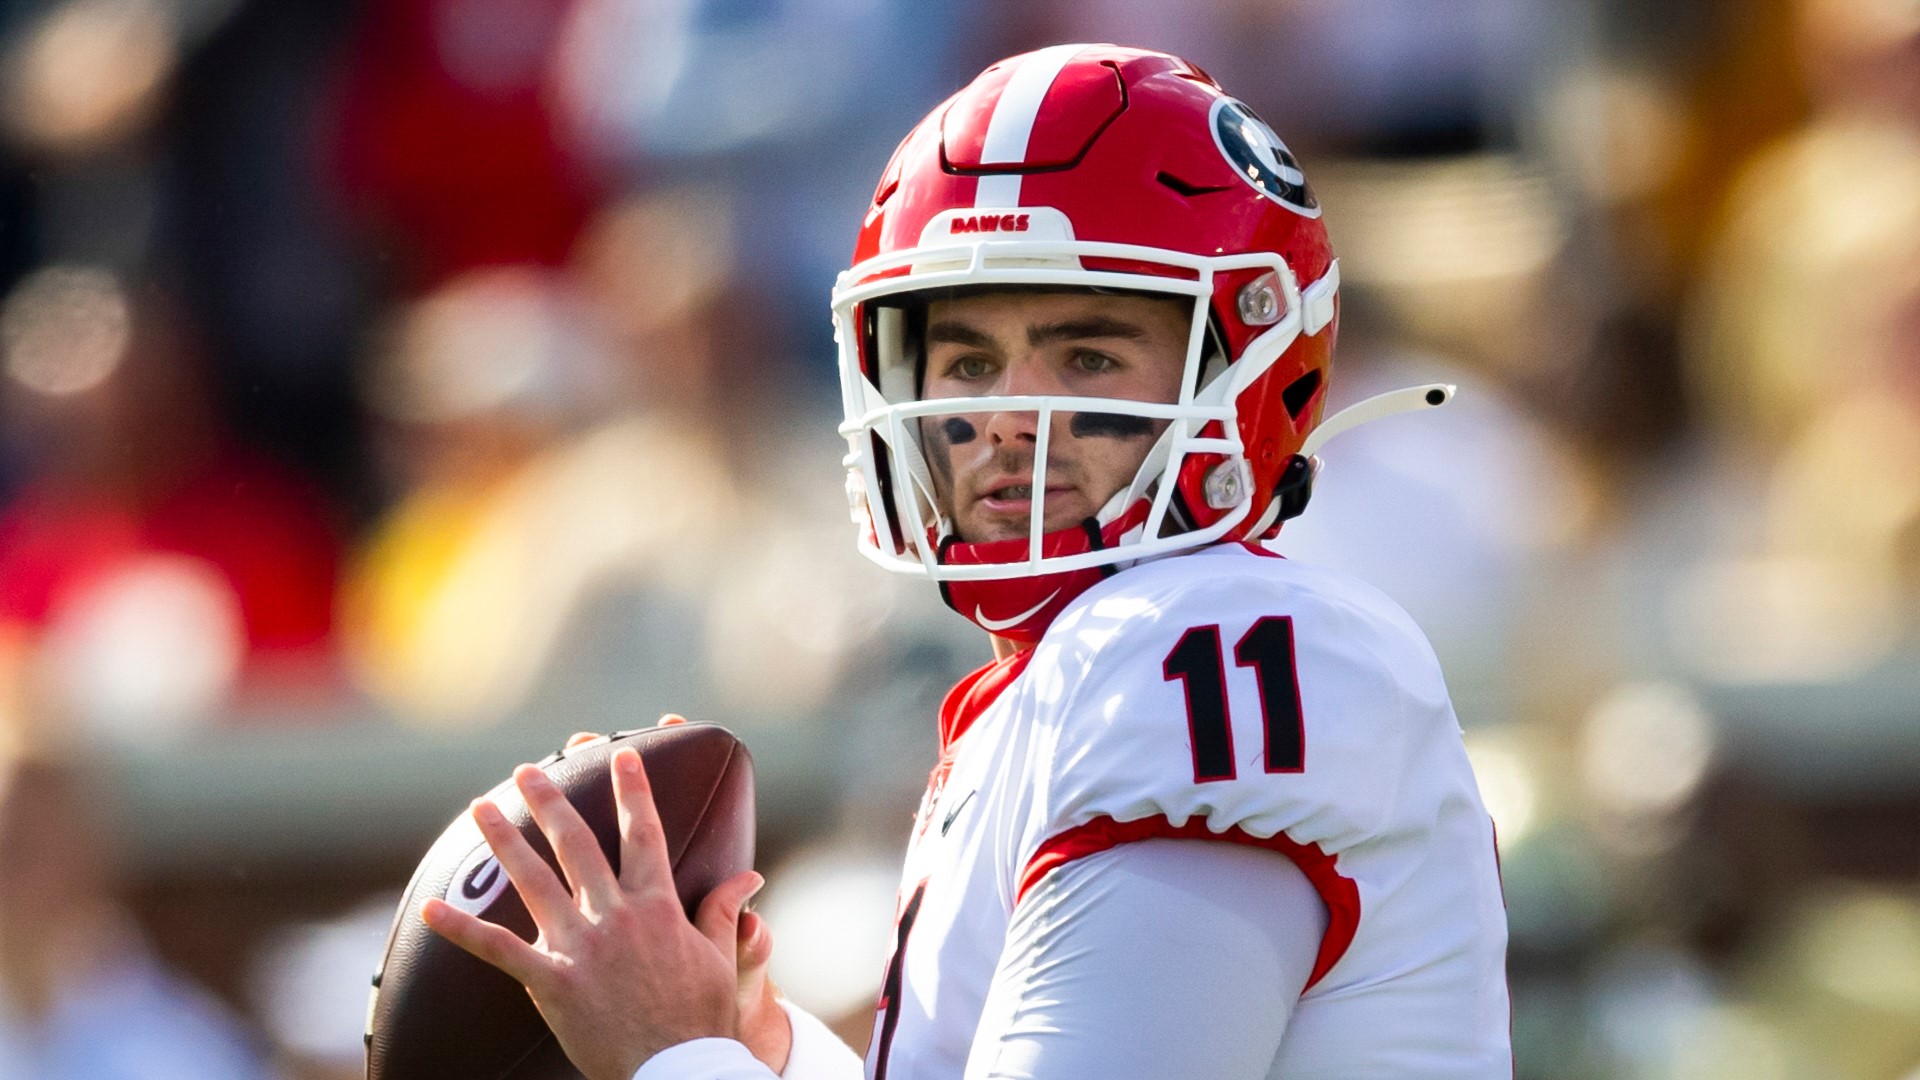 Three Central Georgians were selected to NFL teams including UGA star Jake Fromm.